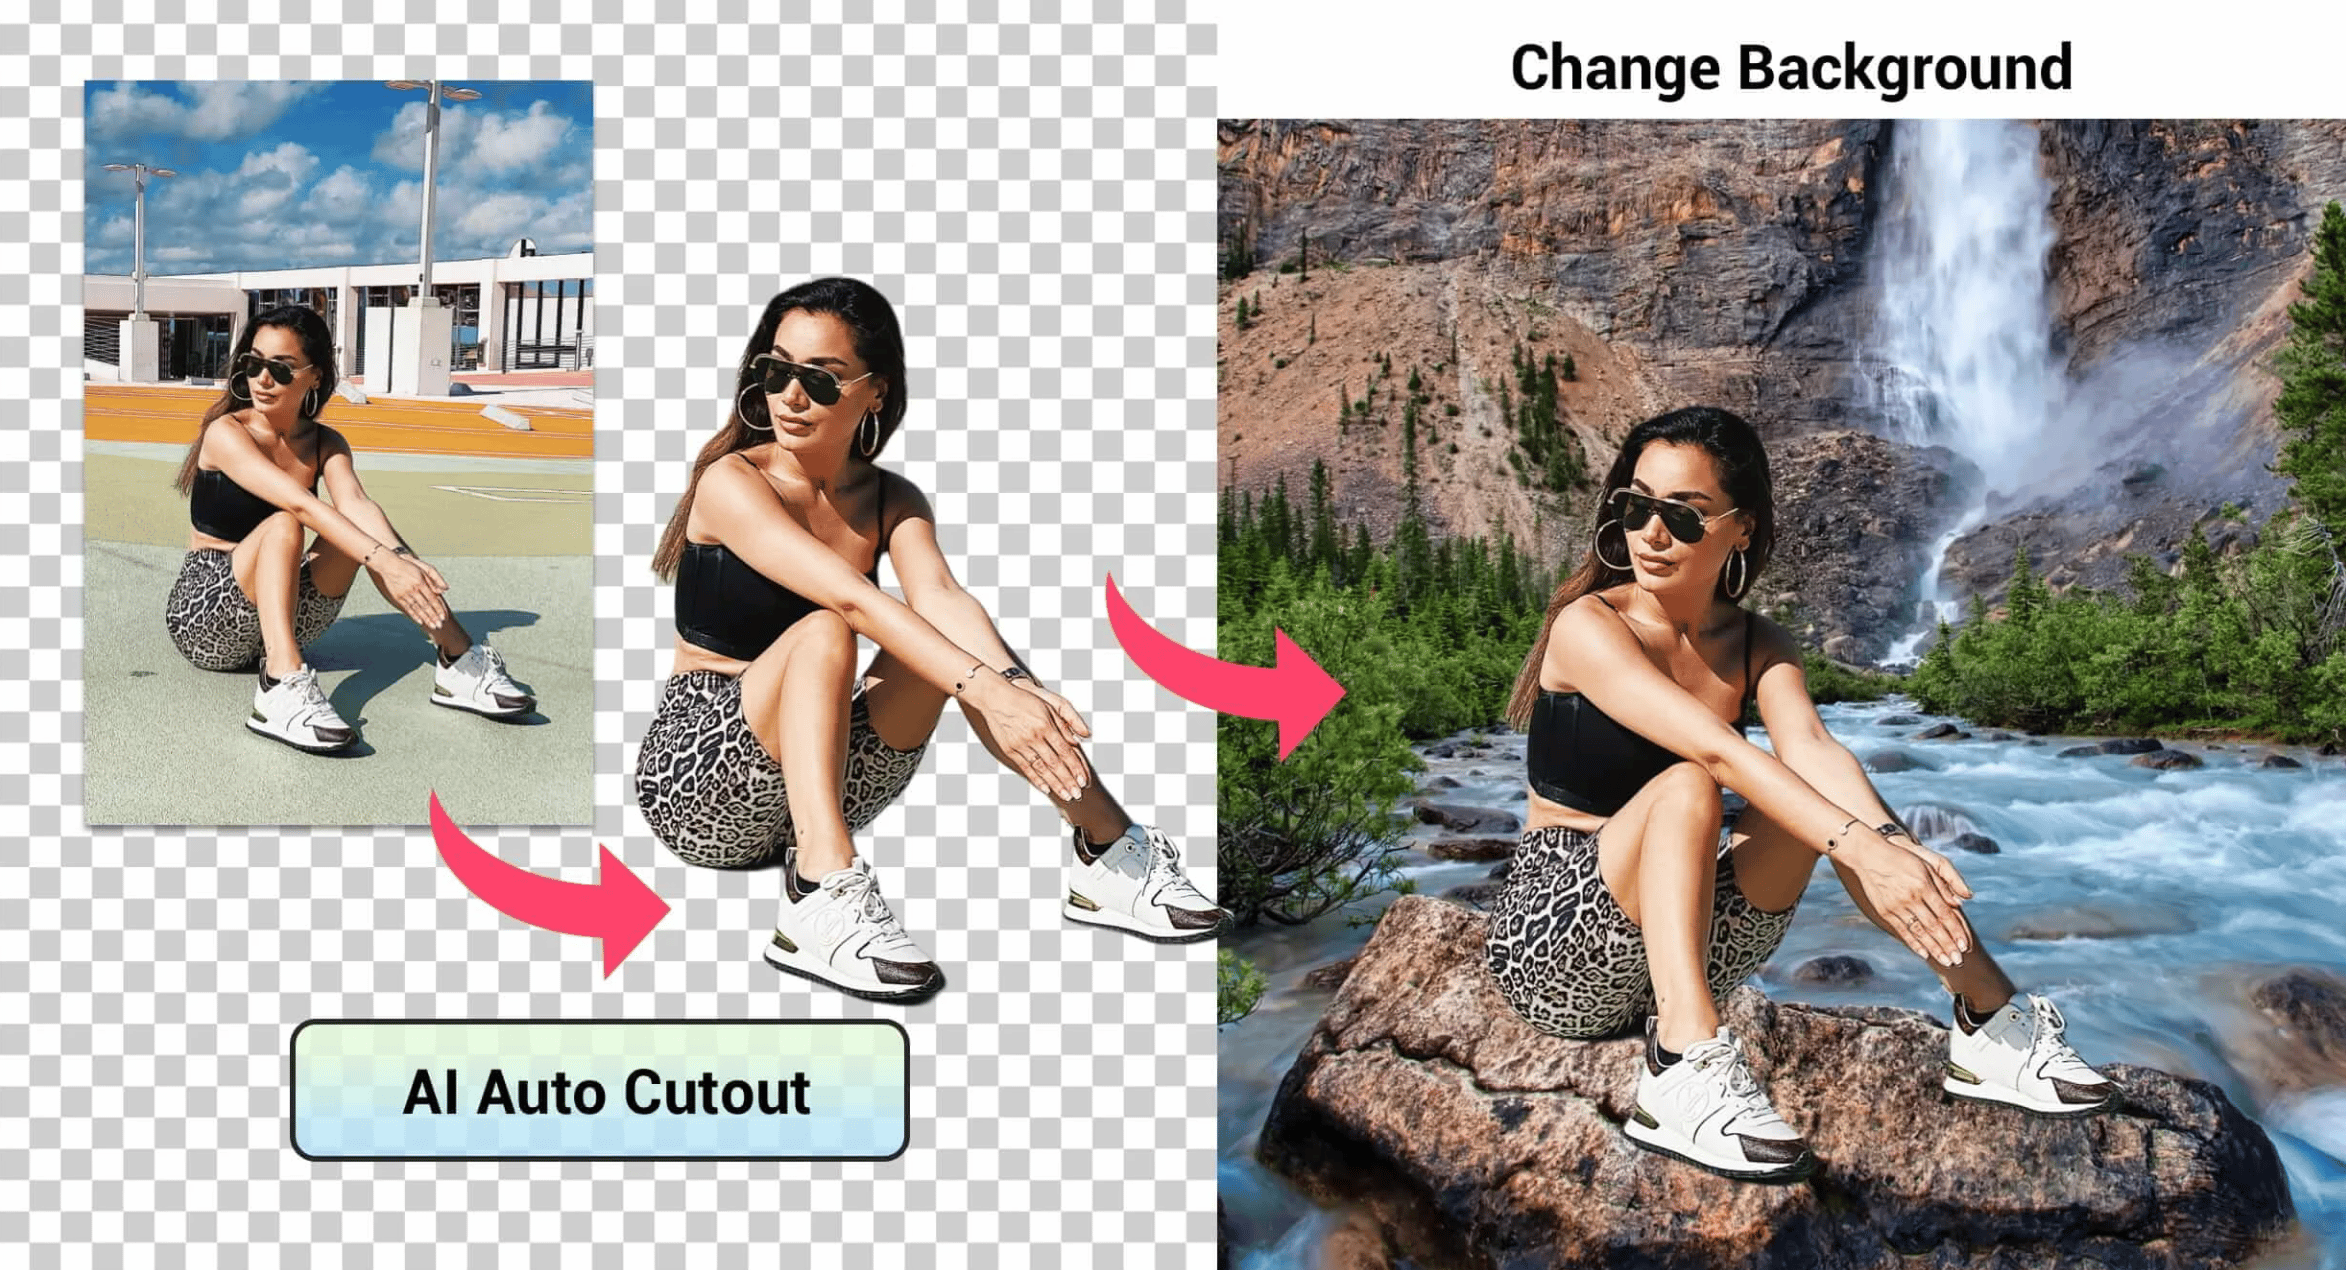 The 9 Best Background Remover Apps | Mobile Marketing Reads